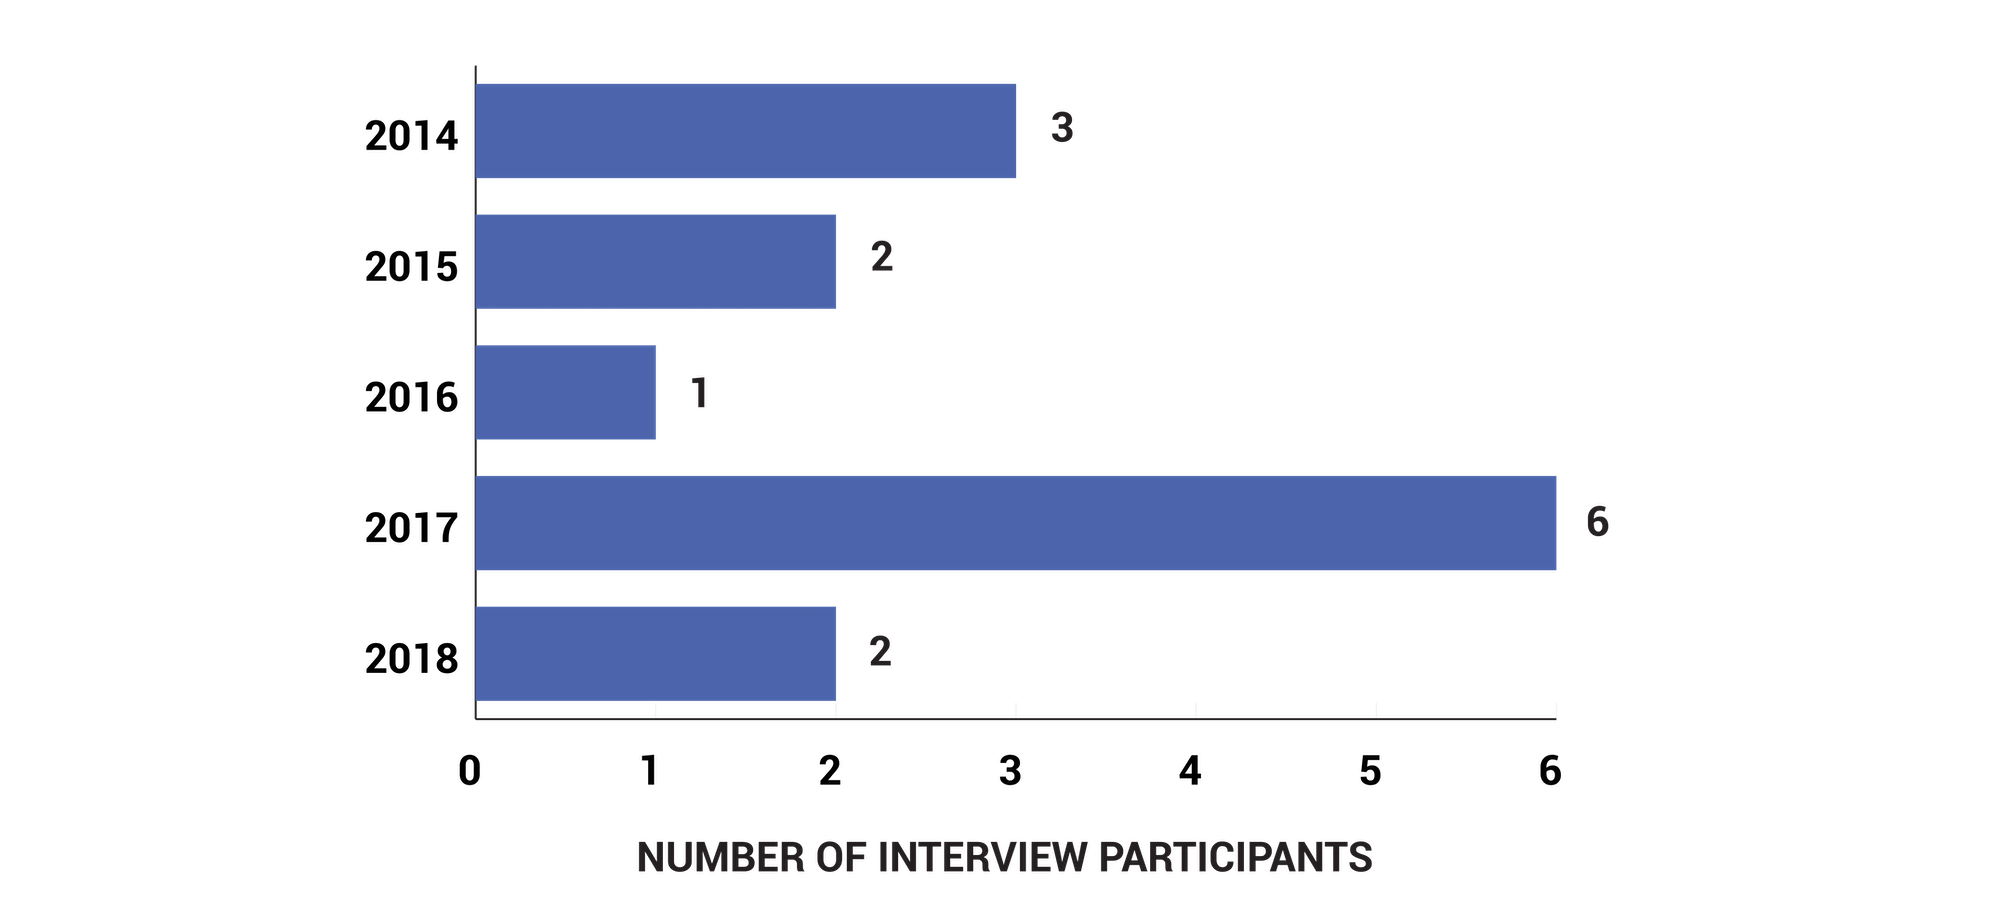 Figure 6 is a bar graph illustrating the number of interviewees by their year of first funding.